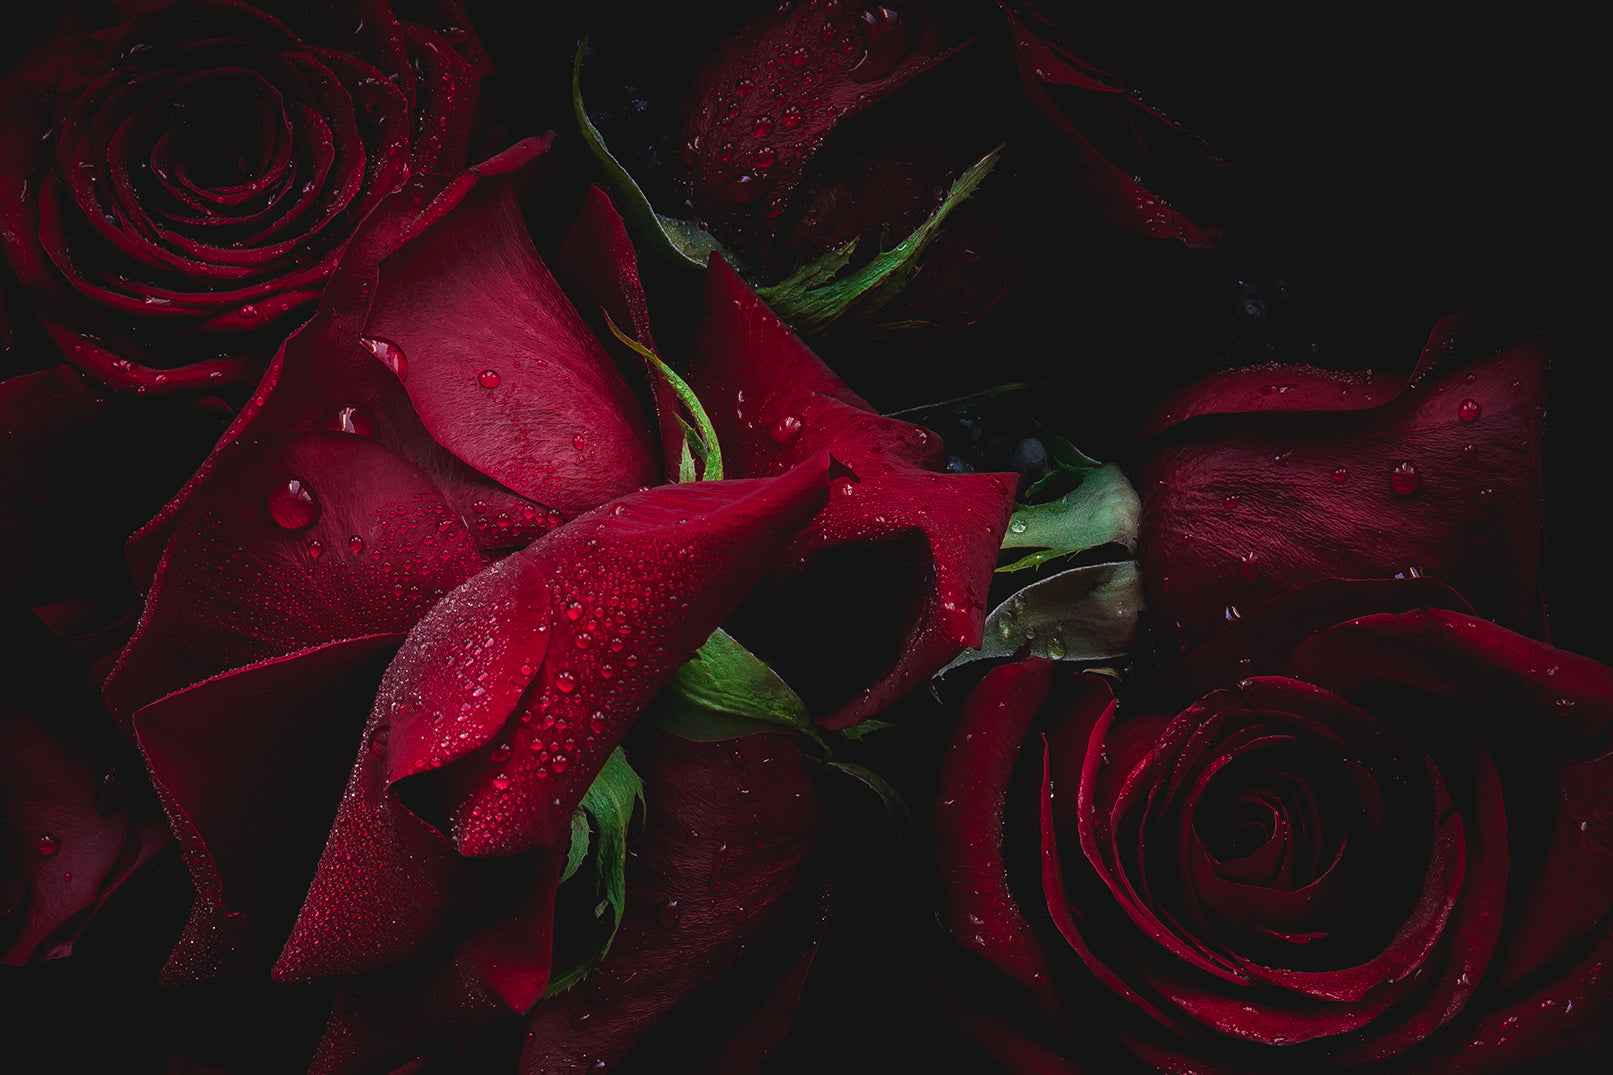 detail of red rose petals with drops of water